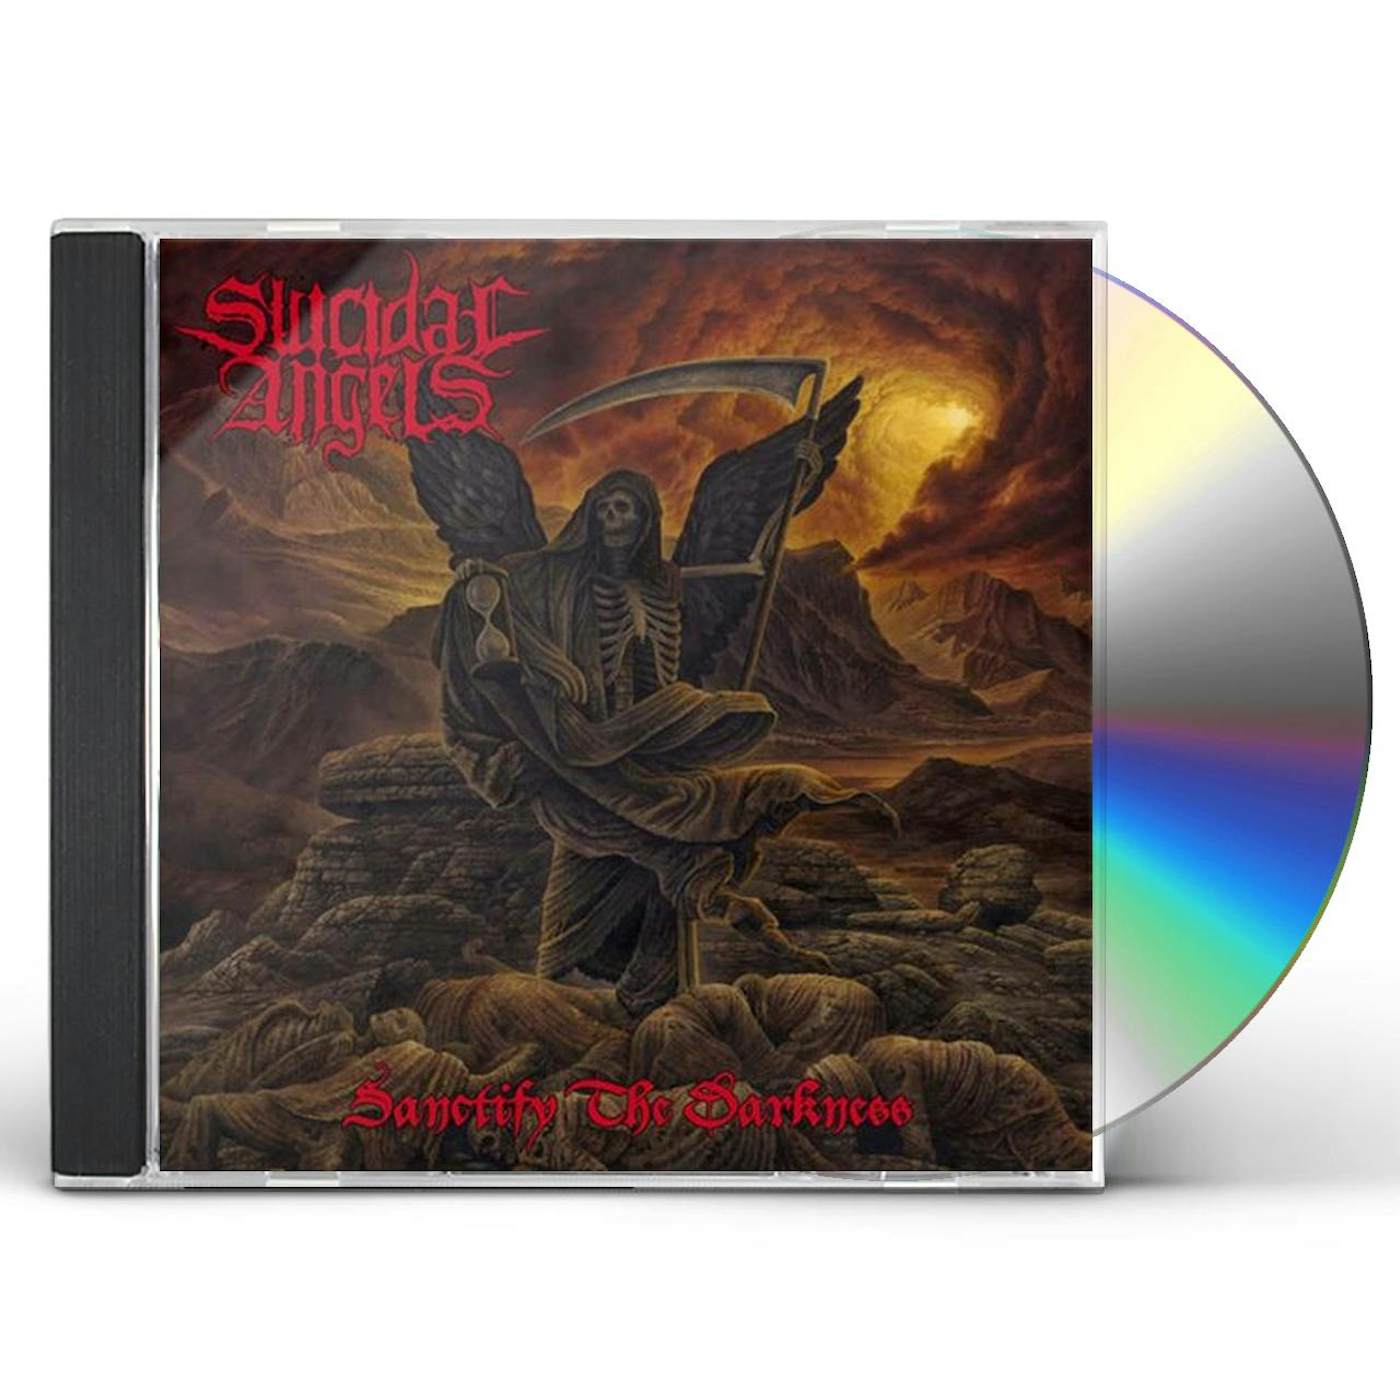 Suicidal Angels SANCTIFY THE DARKNESS CD